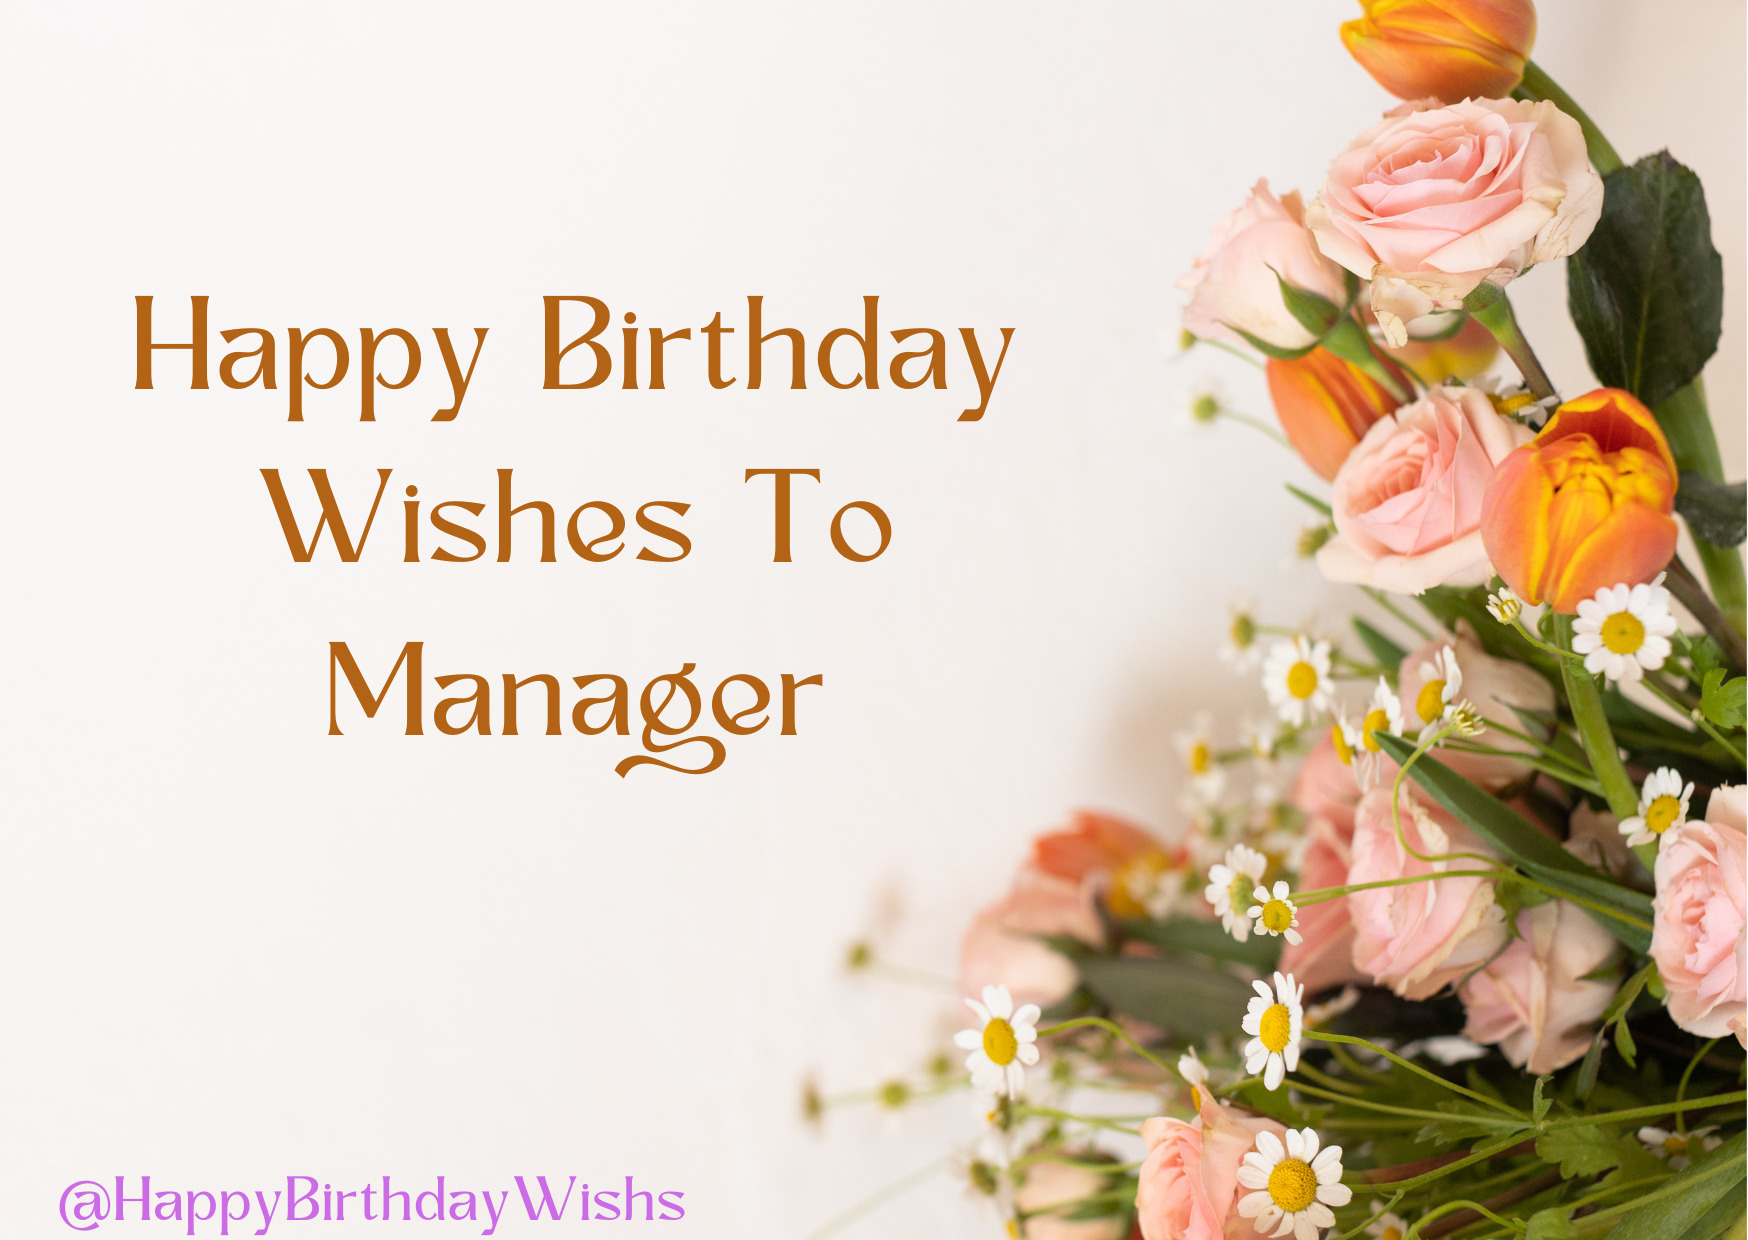 Happy Birthday Wishes To Manager